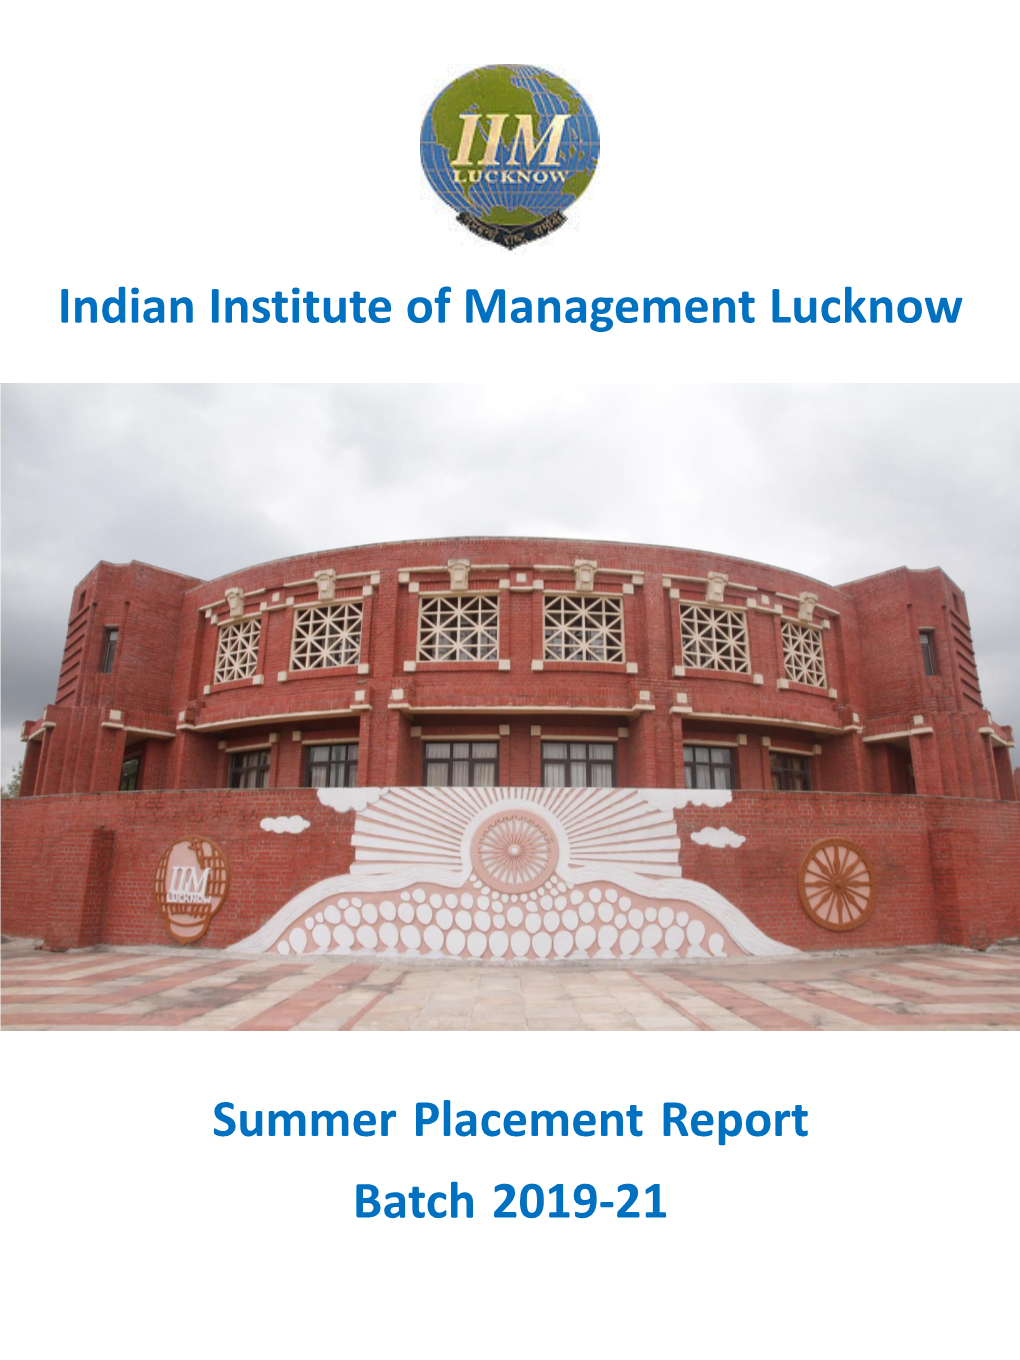 Indian Institute of Management Lucknow Summer Placement Report | Batch 2019-21 Placement Statistics